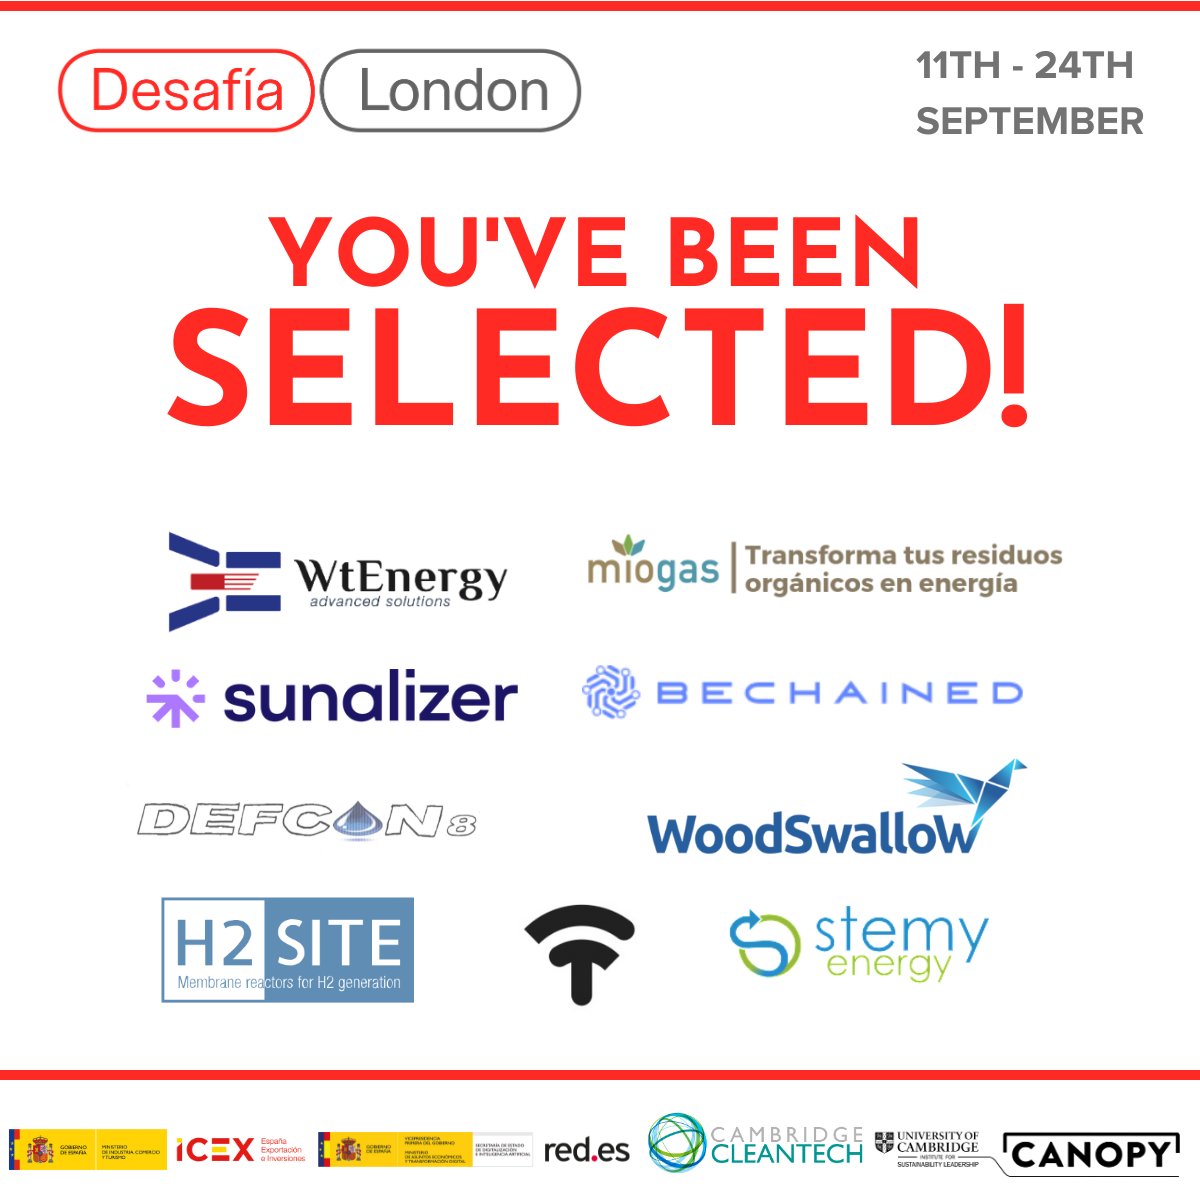 Spain's cleantech ecosystem is growing fast. In 2021, the sector raised €1.6 billion, +20% vs PY. There are now 1,500+ cleantech companies in Spain. We are delighted to announce the first 9 to participate in Desafía London Cleantech Immersion Programme. london.desafia.gob.es/cohort-1